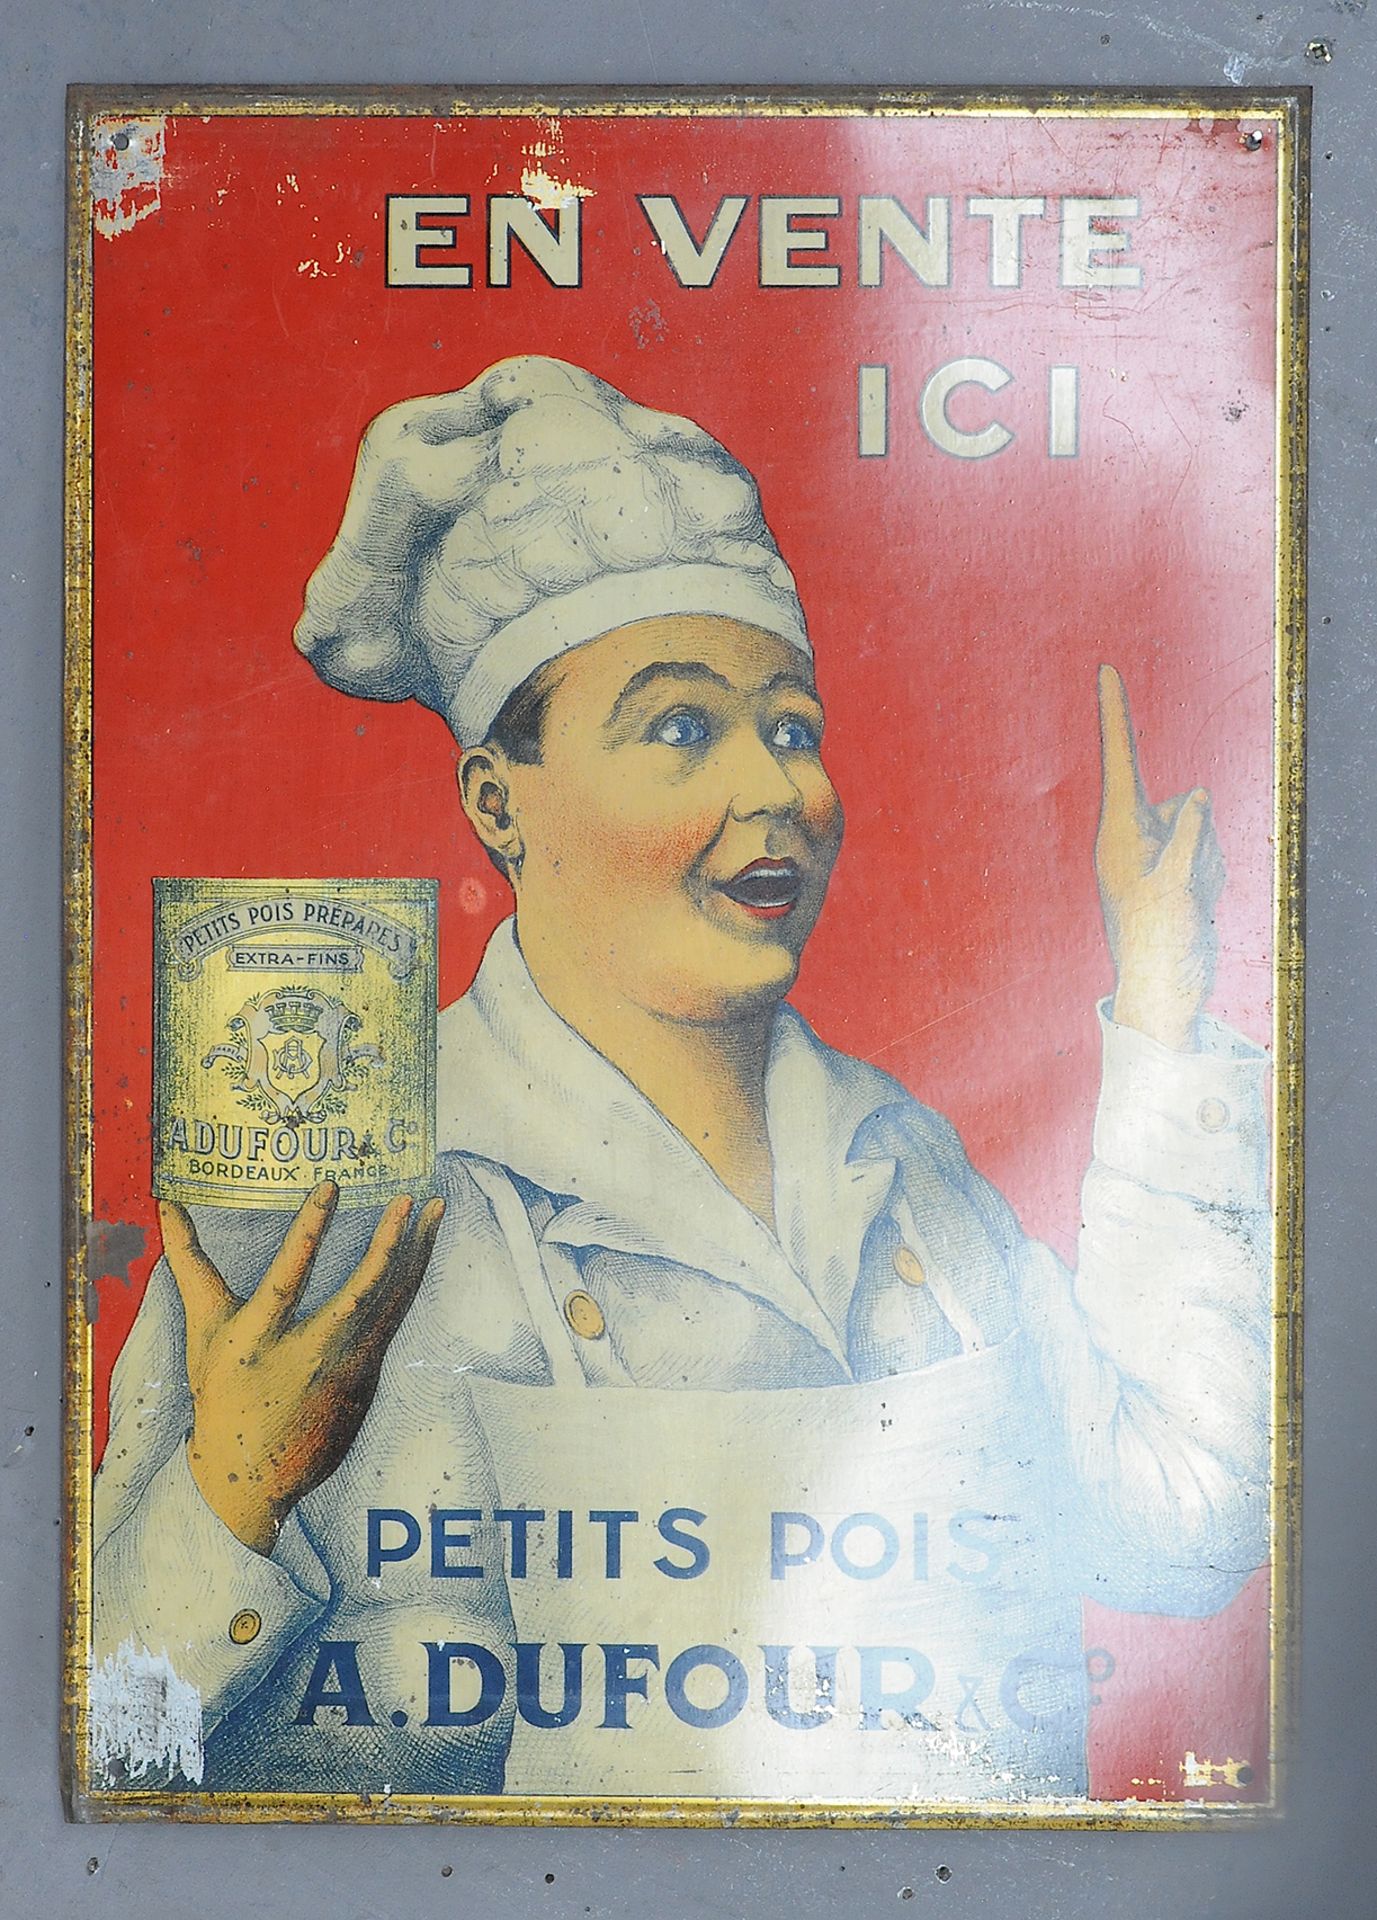 Petits Pois A. Dufour & Co. - Image 3 of 3